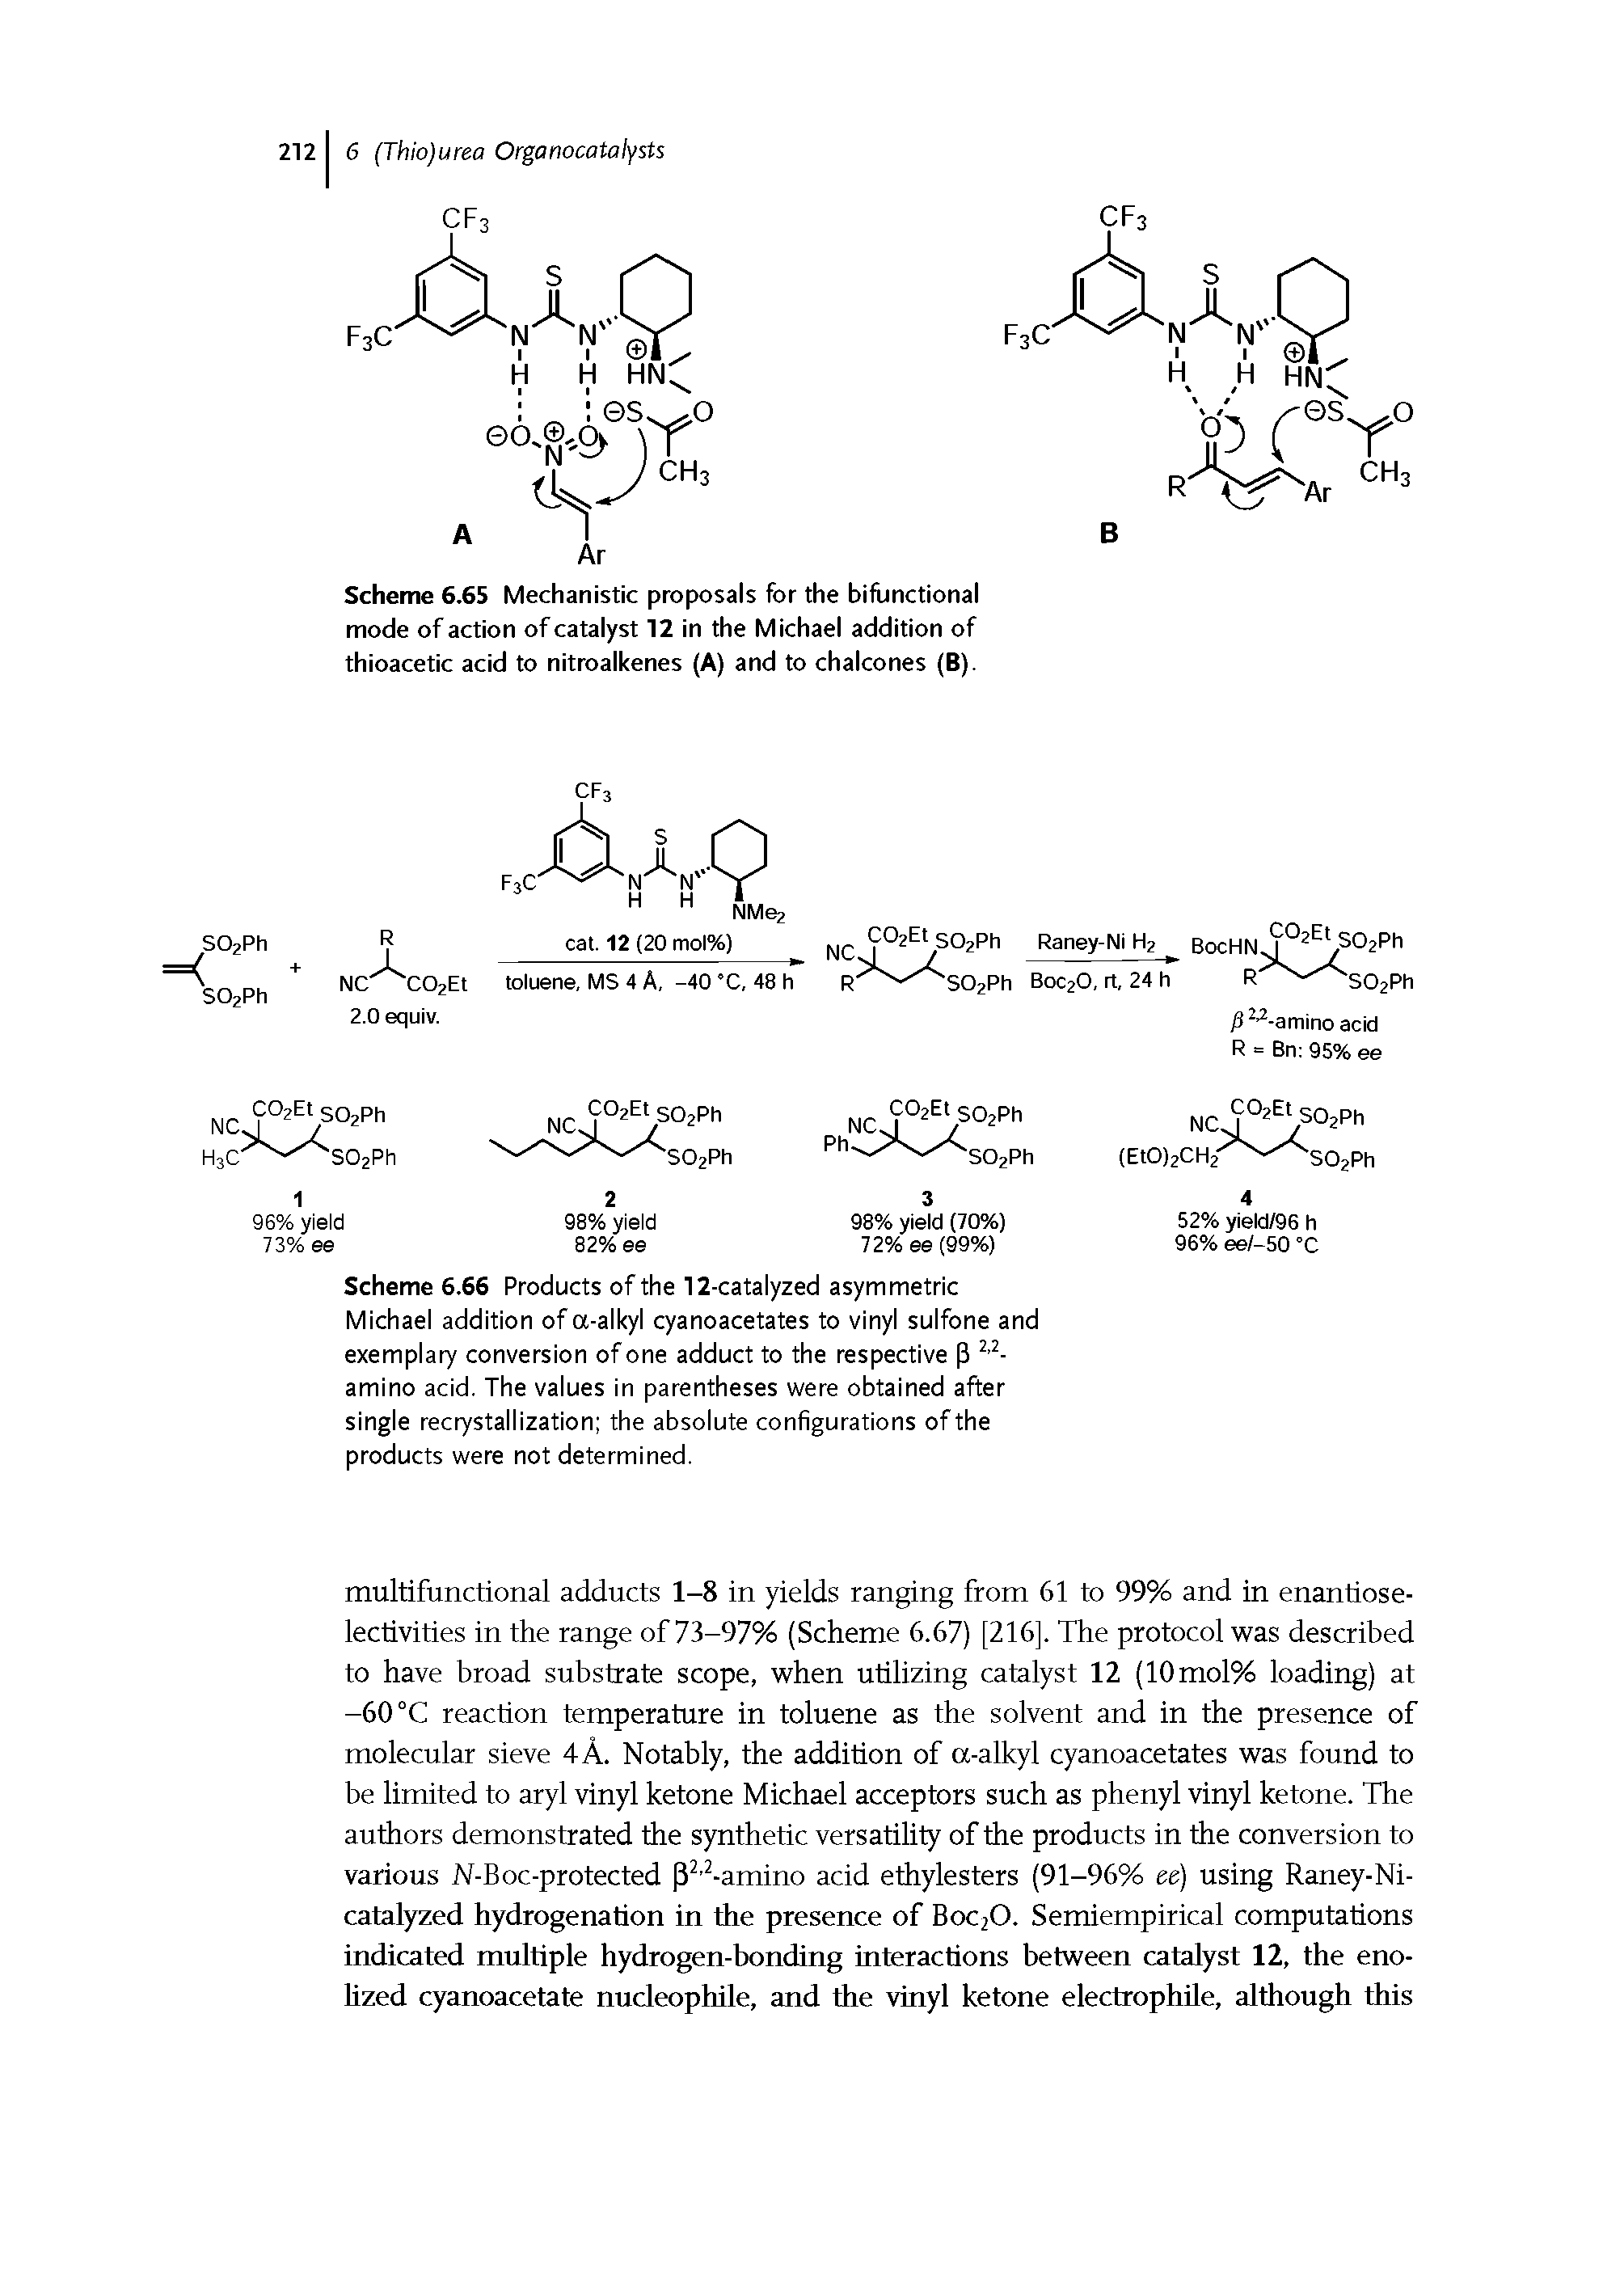 Scheme 6.66 Products of the 12-catalyzed asymmetric Michael addition of a-alkyl cyanoacetates to vinyl sulfone and exemplary conversion of one adduct to the respective 3 amino acid. The values in parentheses were obtained after single recrystallization the absolute configurations of the products were not determined.